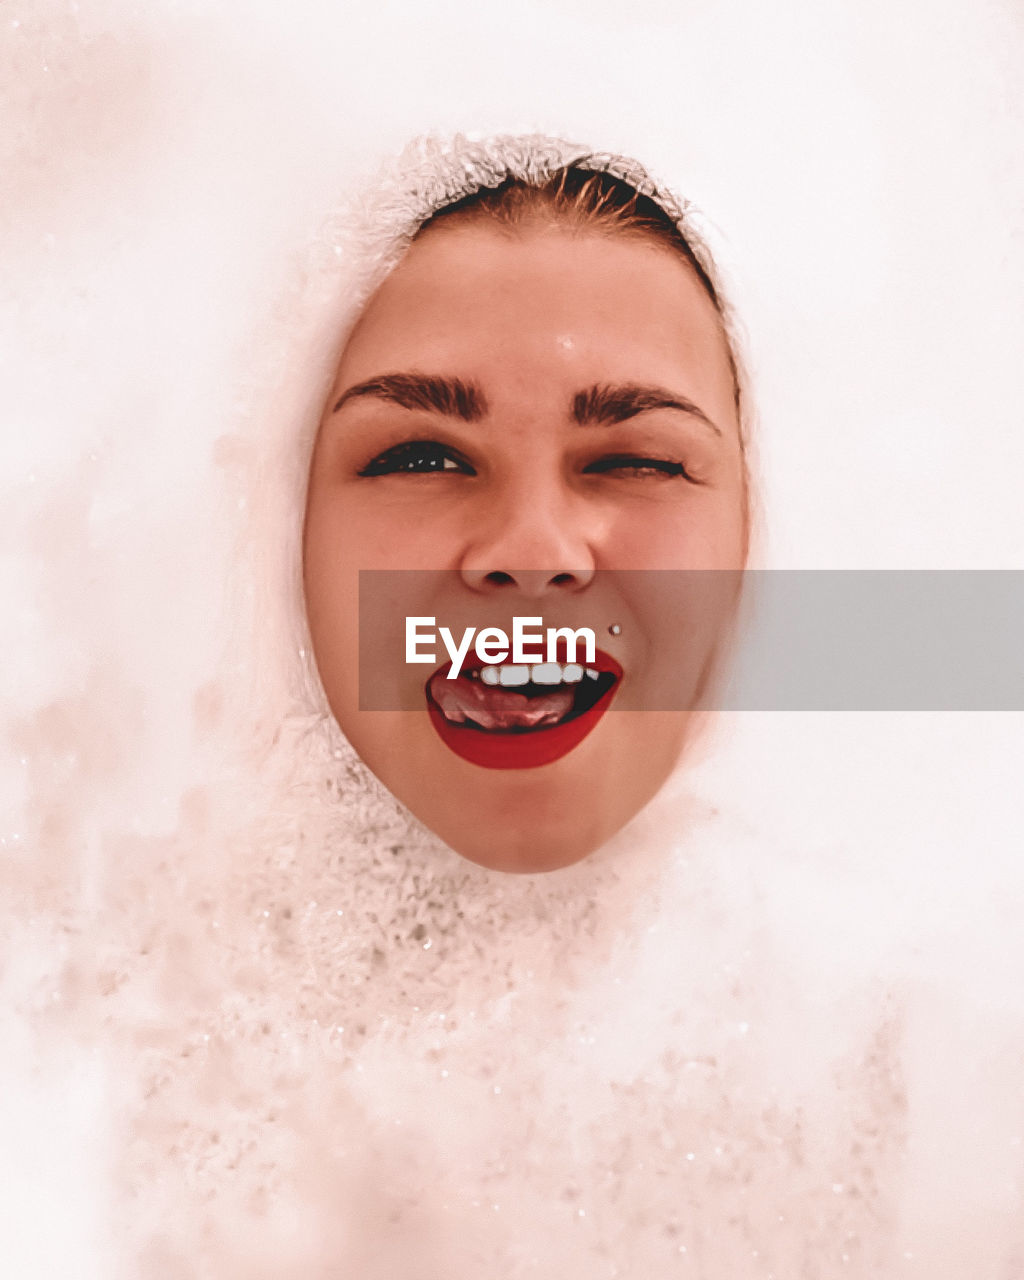 skin, bathtub, bathroom, human face, one person, women, close-up, human head, taking a bath, portrait, domestic bathroom, nose, adult, young adult, body care, soap sud, happiness, smiling, bubble bath, pink, lip, headshot, hygiene, indoors, relaxation, human mouth, lifestyles, wellbeing, domestic room, enjoyment, cheerful, cleaning, human eye, hand, washing, bubble, emotion, water, eyes closed, nature, person, food and drink, home, female, front view, beauty treatment, leisure activity, child, mouth open, spa treatment, photo shoot, make-up, beauty spa, teeth, looking at camera, personal care, skin care, red, fun, finger, wet, blond hair, copy space, laughing, brown hair, smile, portrait photography, freshness